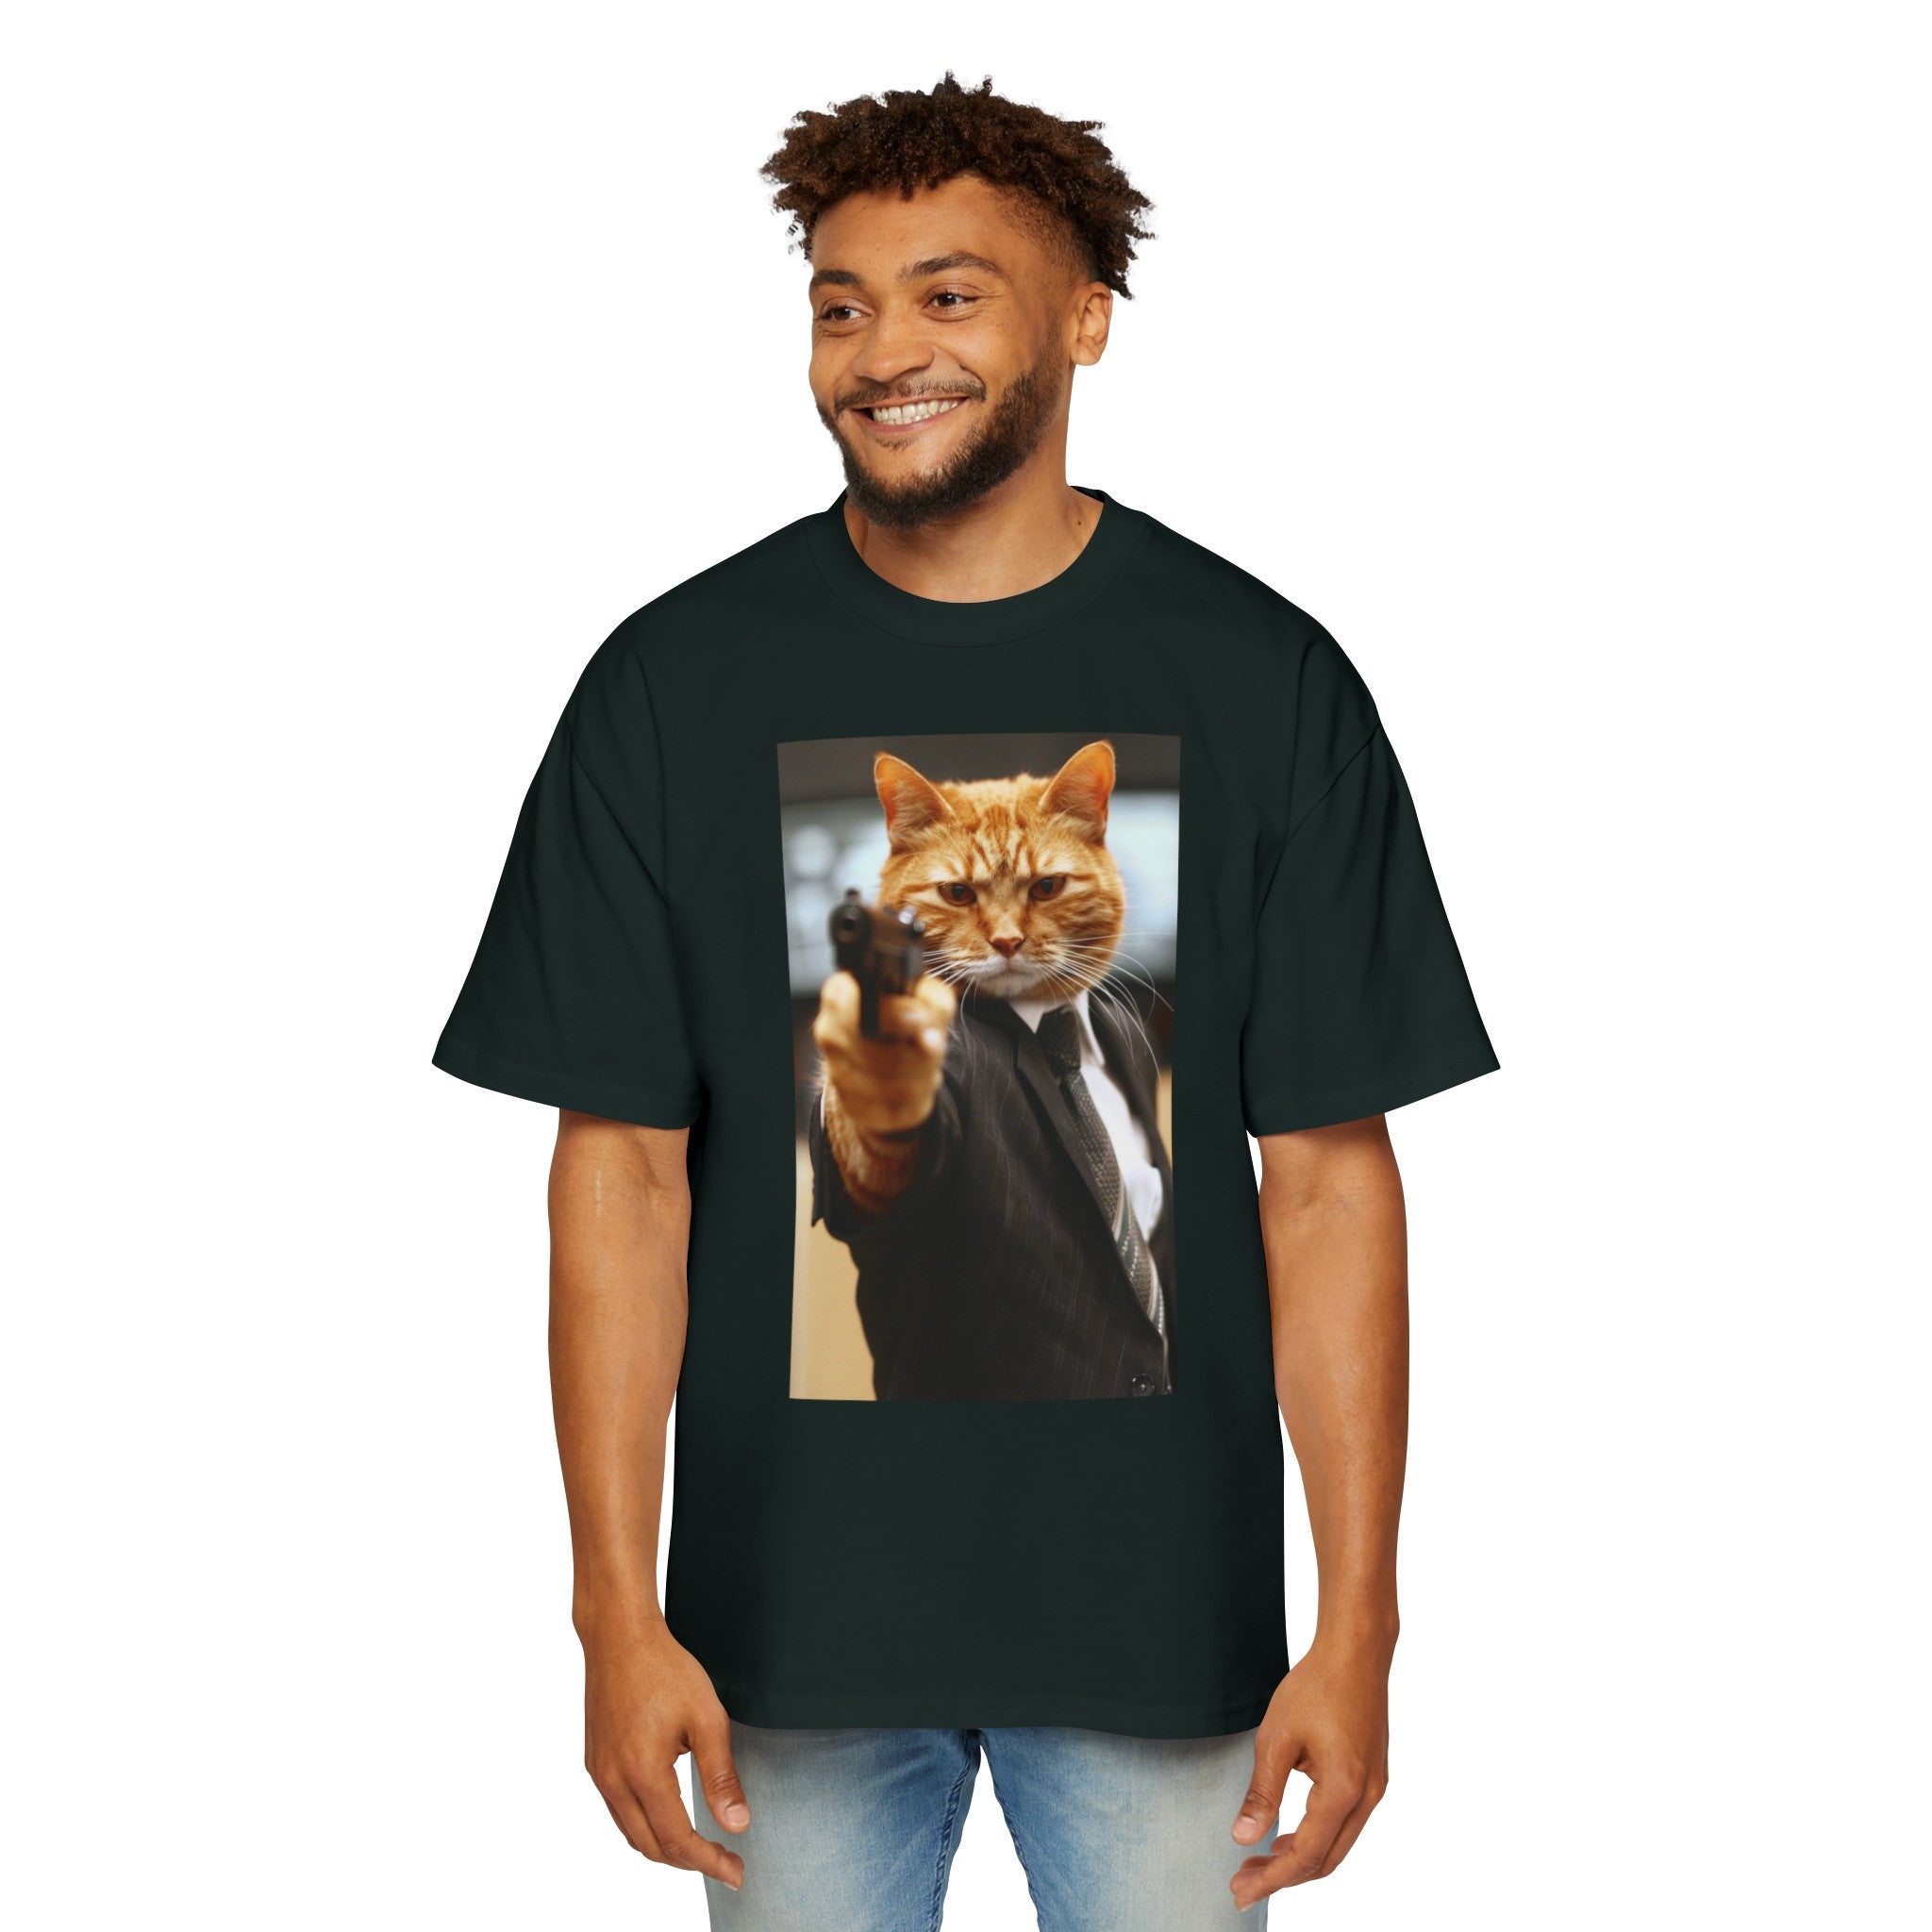 The image showcases a stylish men's heavy oversized tee in a dark color, enhancing the vivid Hitman Cat graphic. The tee's relaxed fit is visible, promising comfort and style. The design is eye-catching and humorous, perfect for those who like their fashion to come with a story.